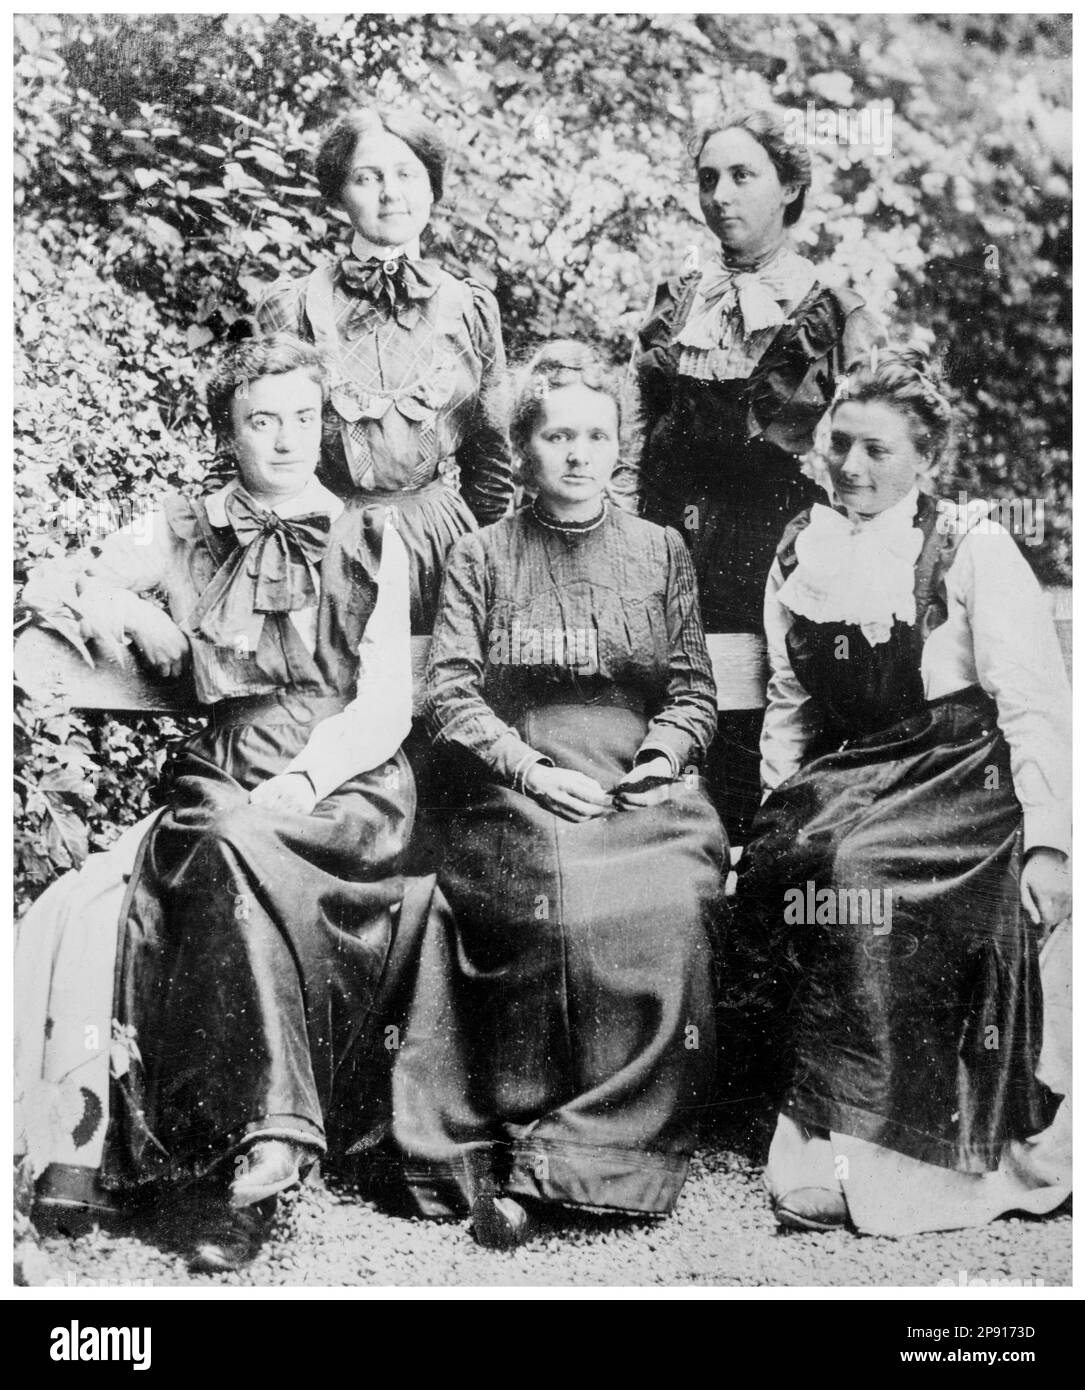 Marie Curie (1867-1934), surrounded by four of her students, portrait photograph by Bain News Service, 1910-1915 Stock Photo